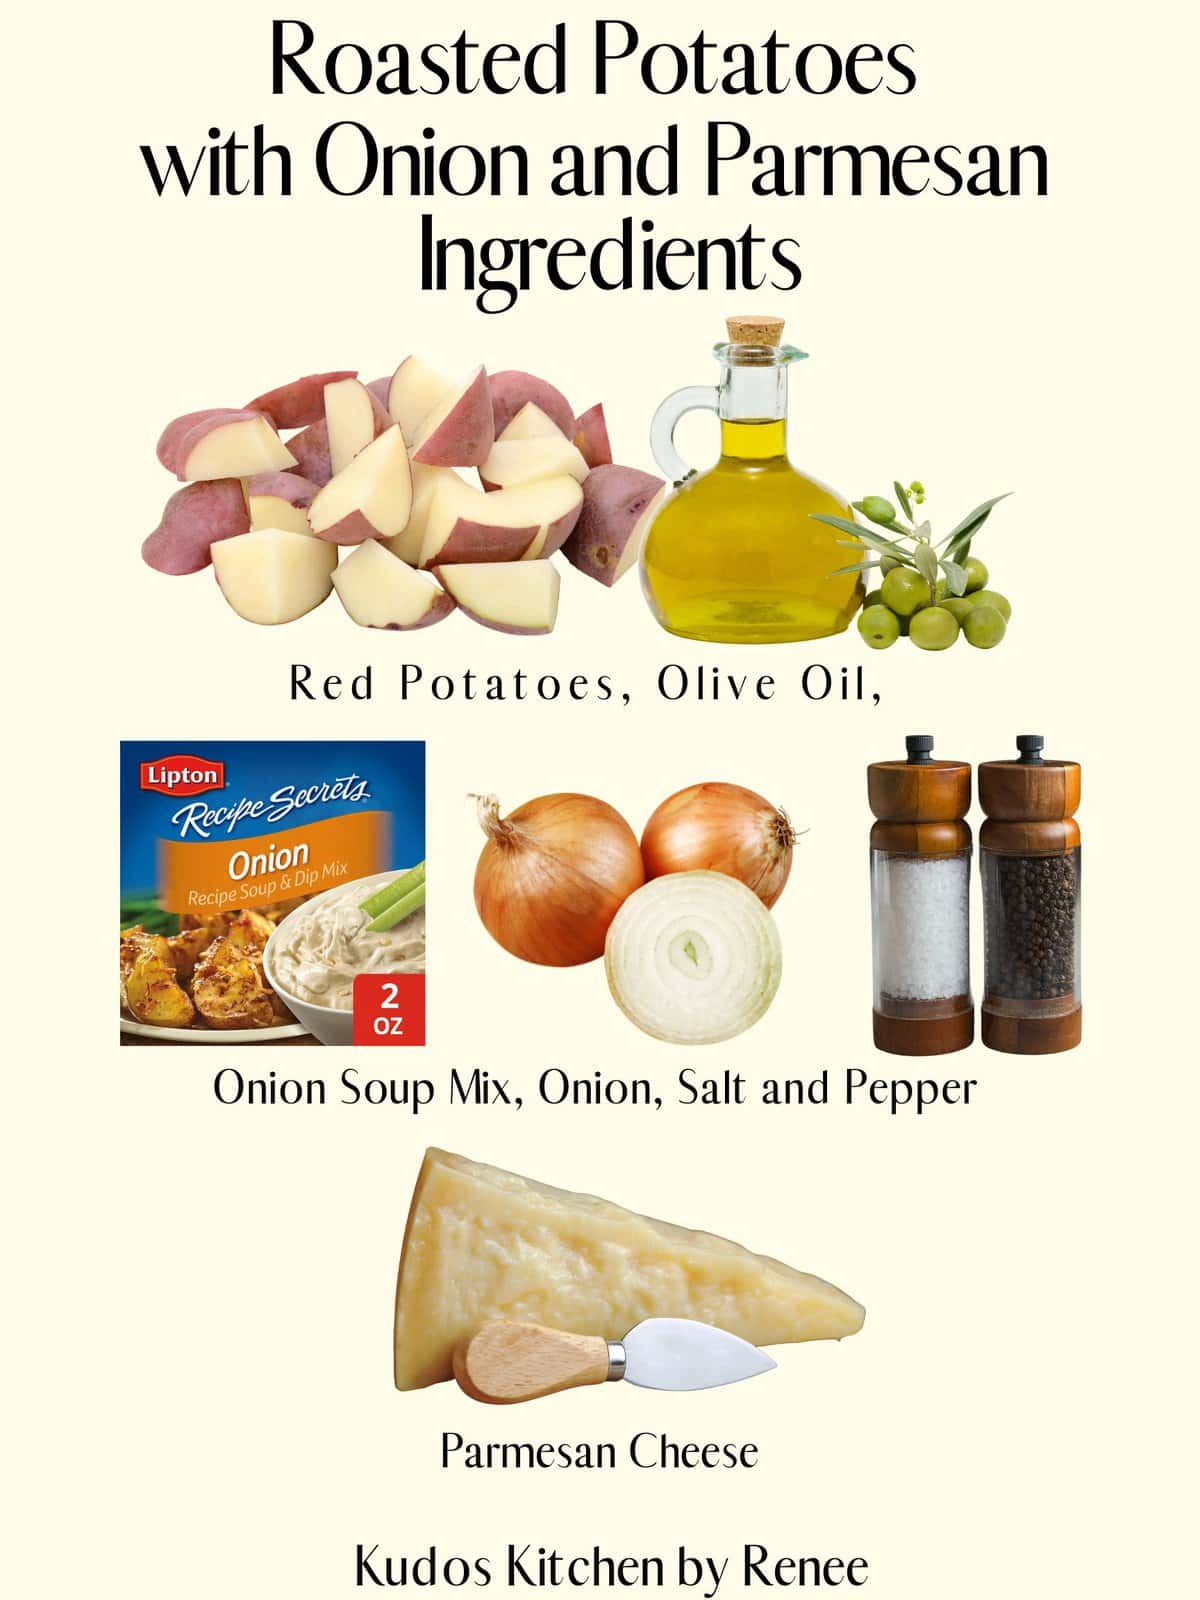 A visual ingredient list for making Roasted Potatoes with Onion and Parmesan.